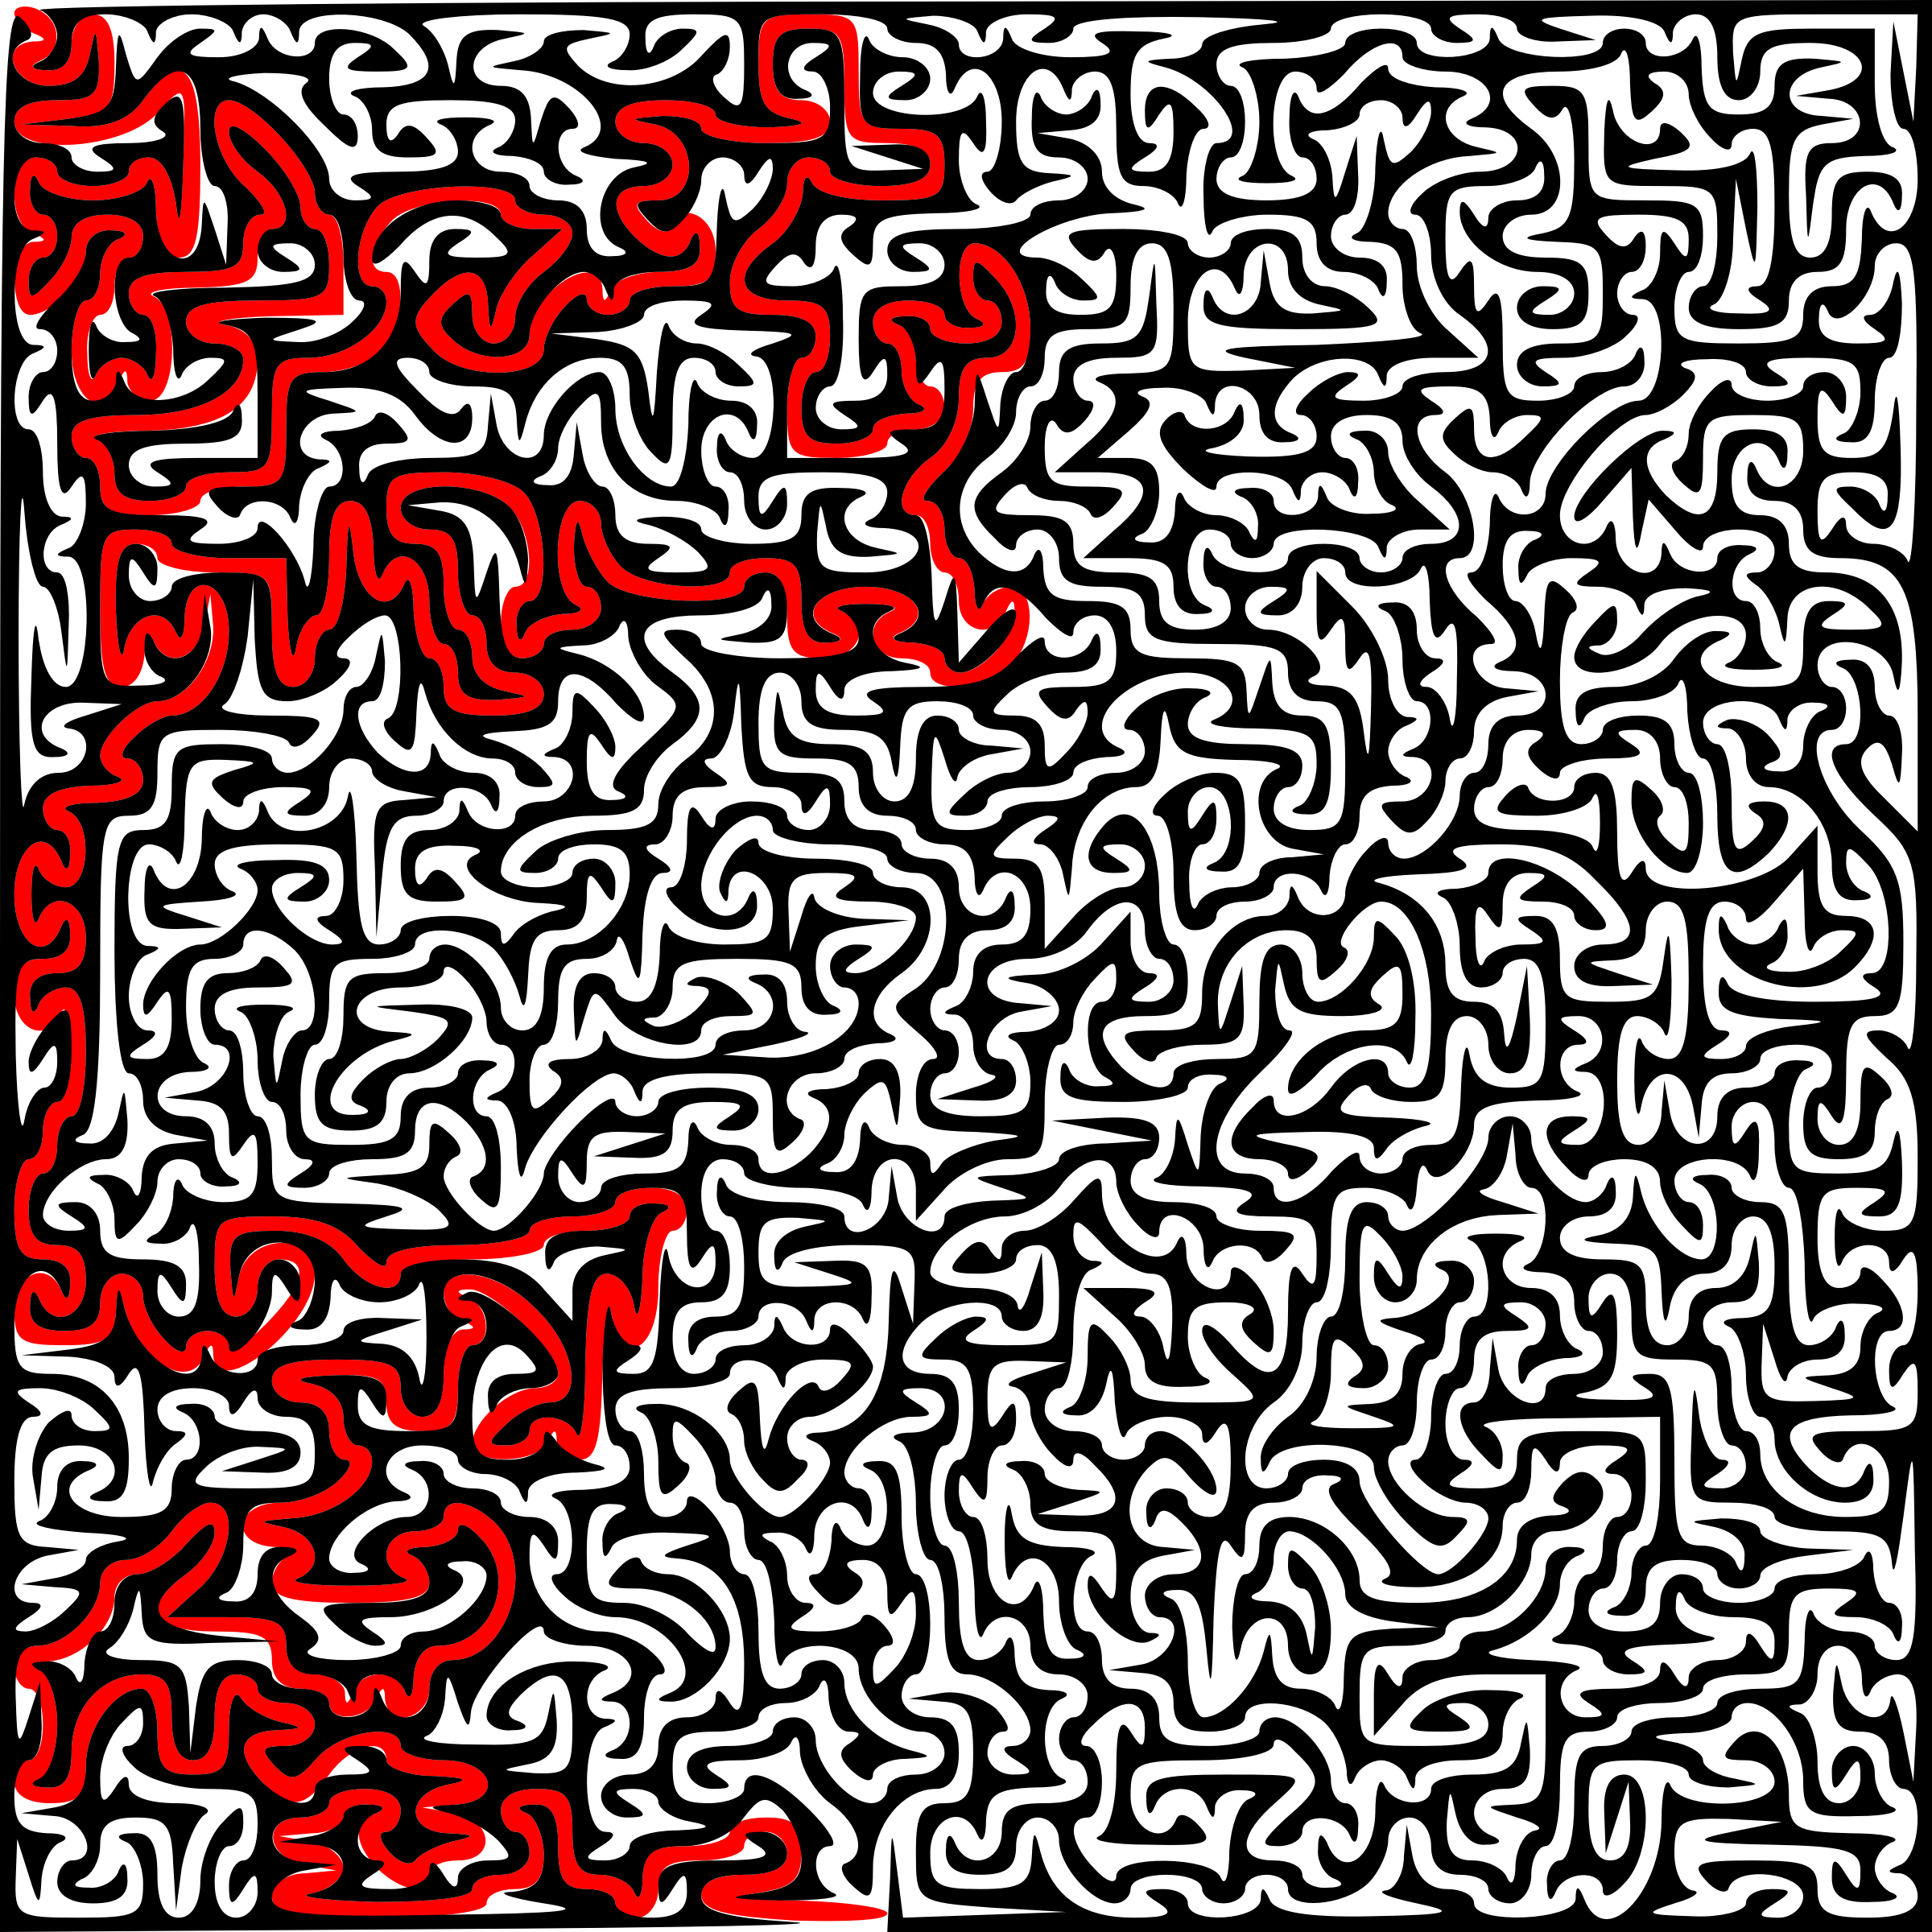 maze clipart red